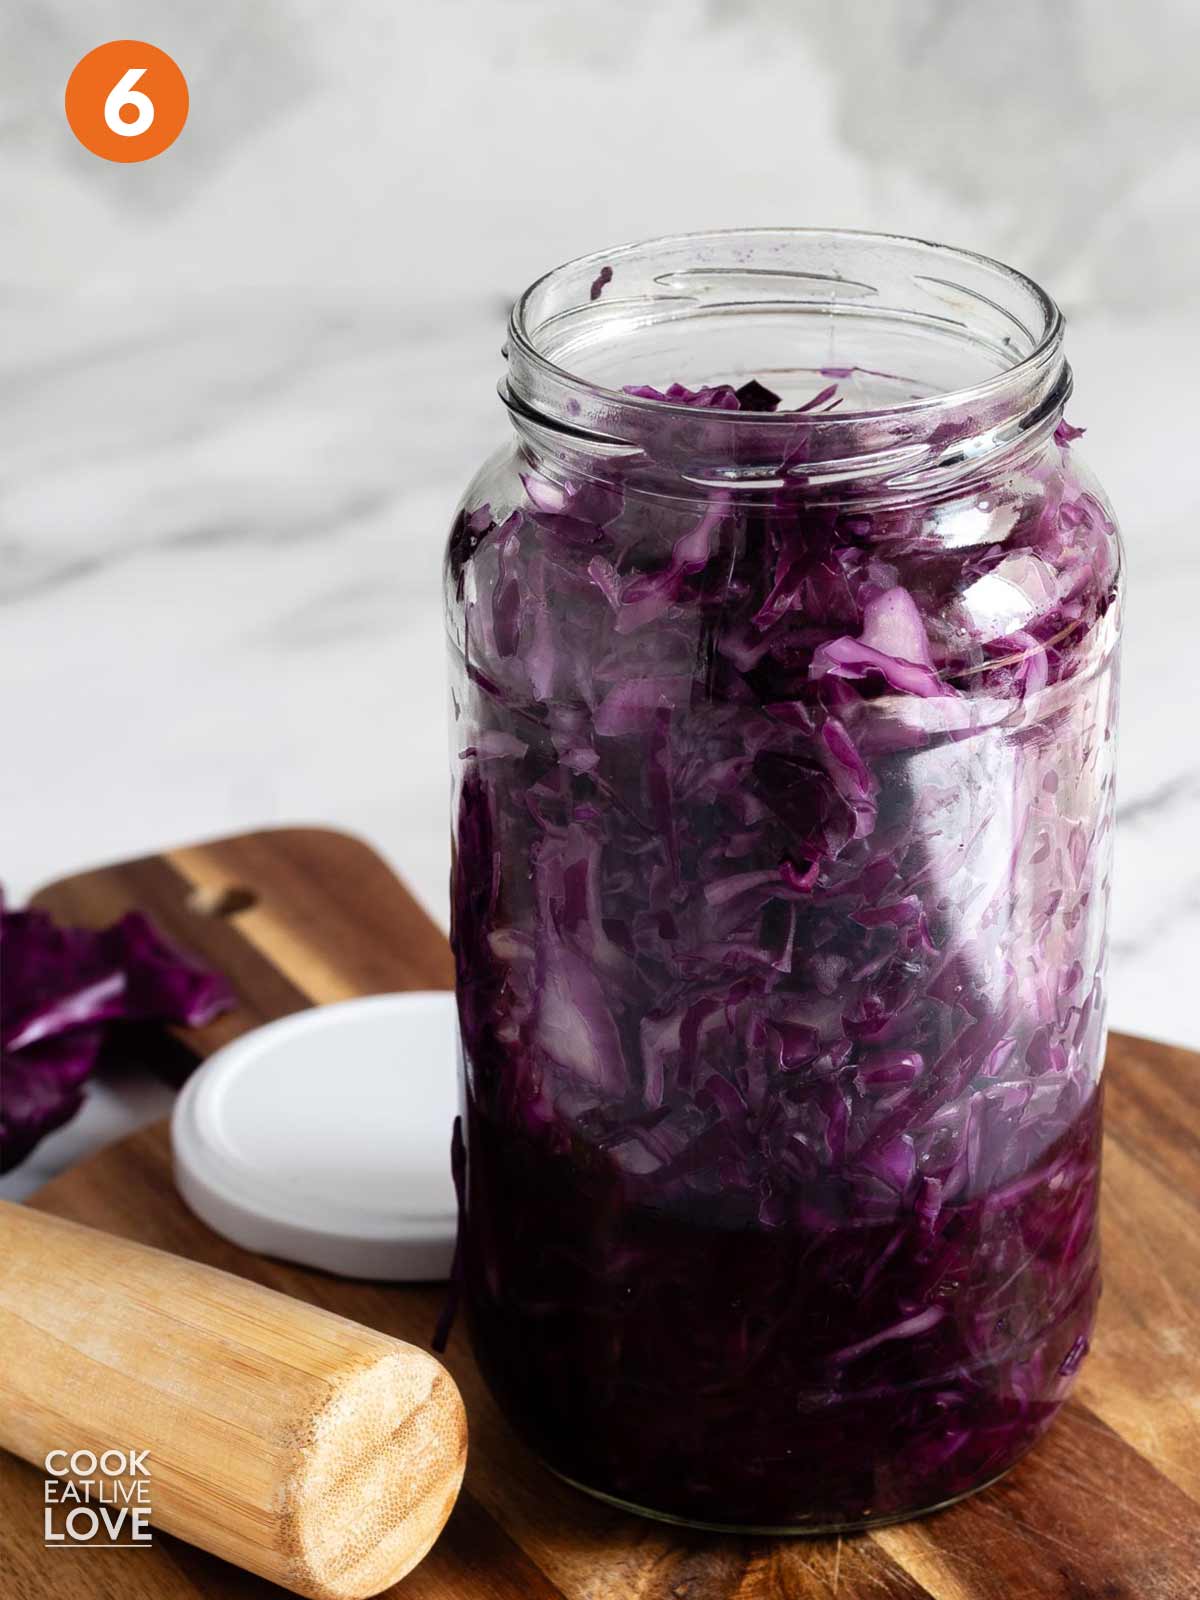 Red cabbage in a jar on the counter.